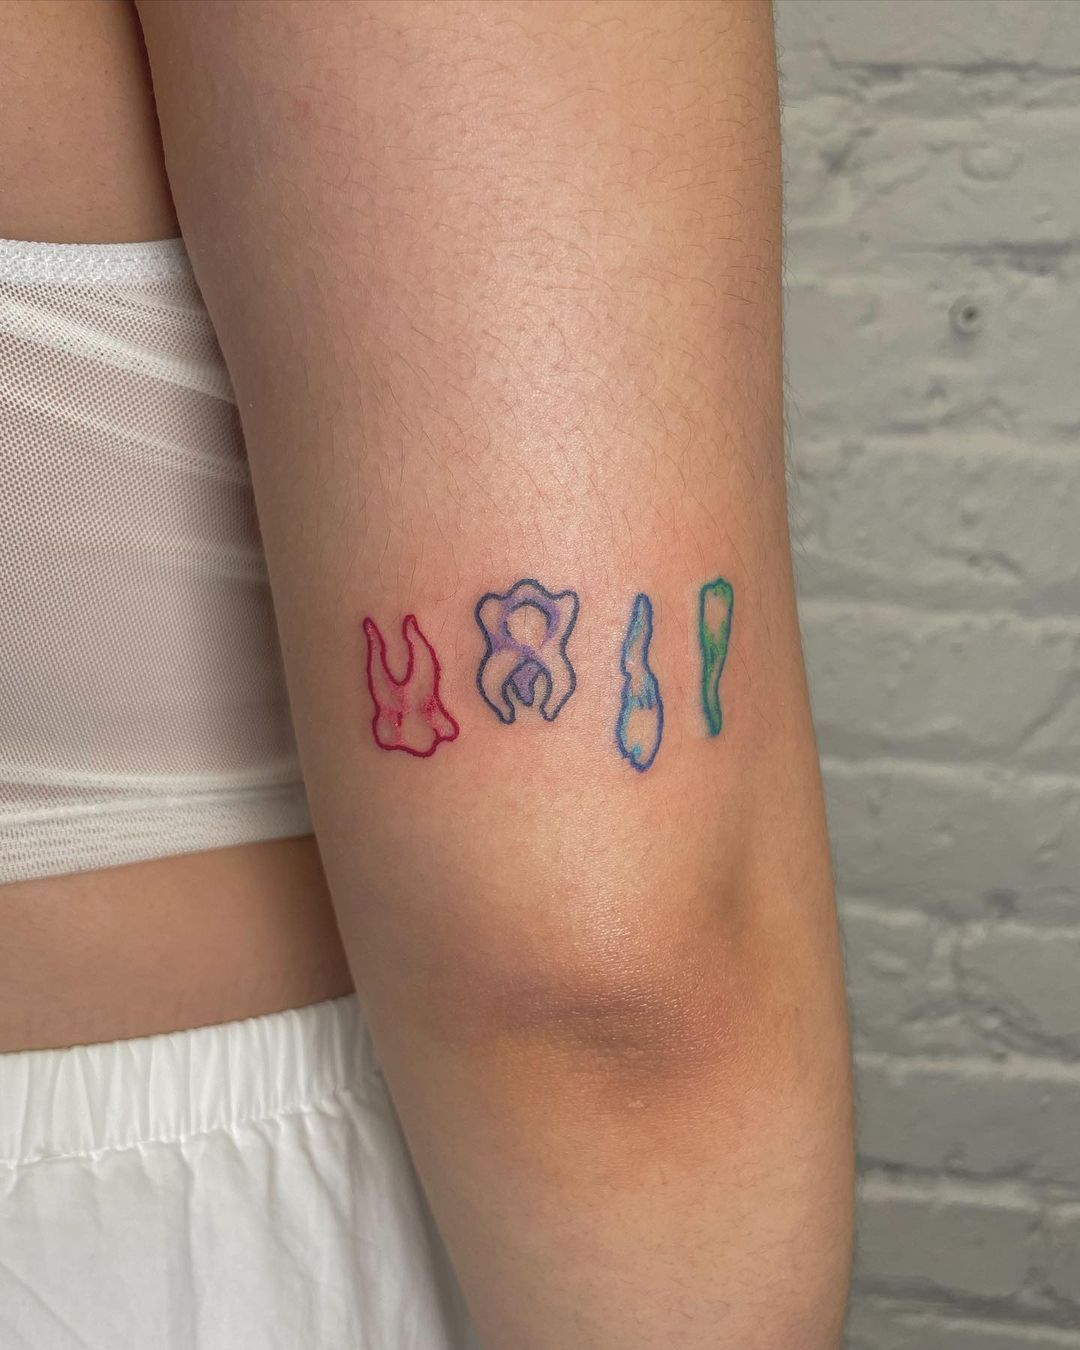 Colorful tattoo ideas for women by mossunderwood